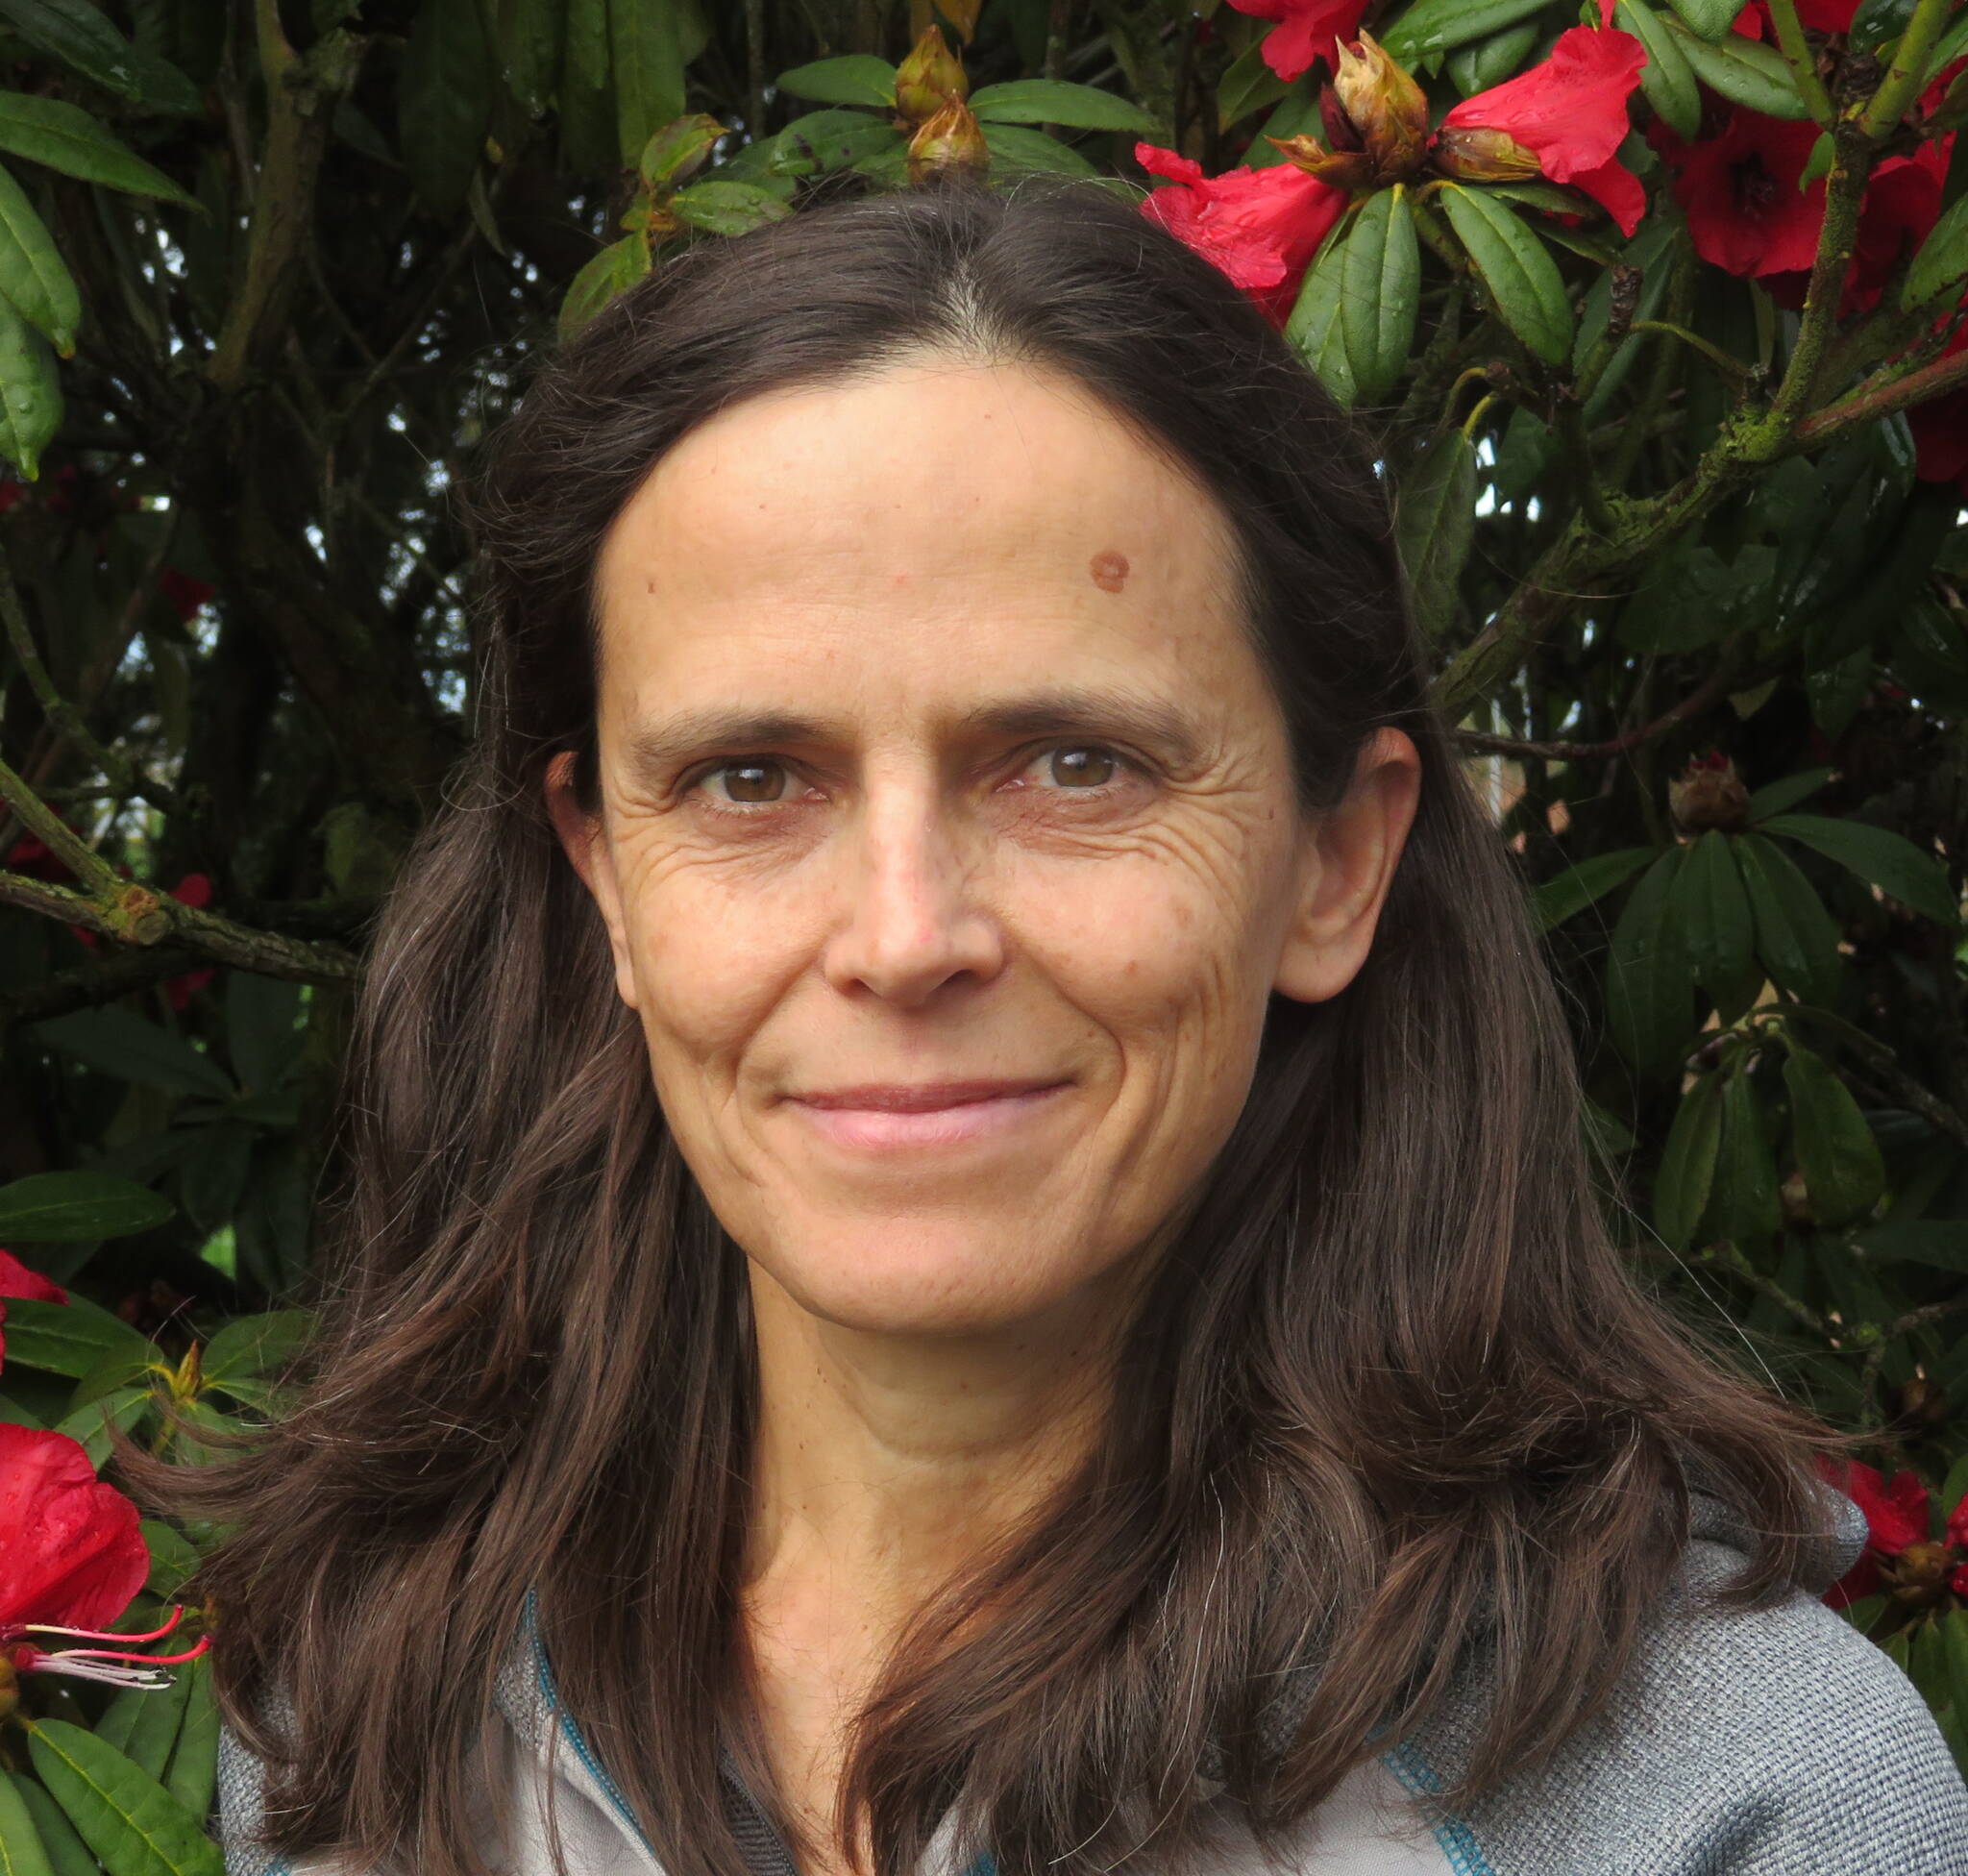 Contributed photo.
The Orcas Island Garden Club will host a Hybrid meeting featuring Lindsey du Toit (pictured) Wednesday, March 15 at 10 a.m.